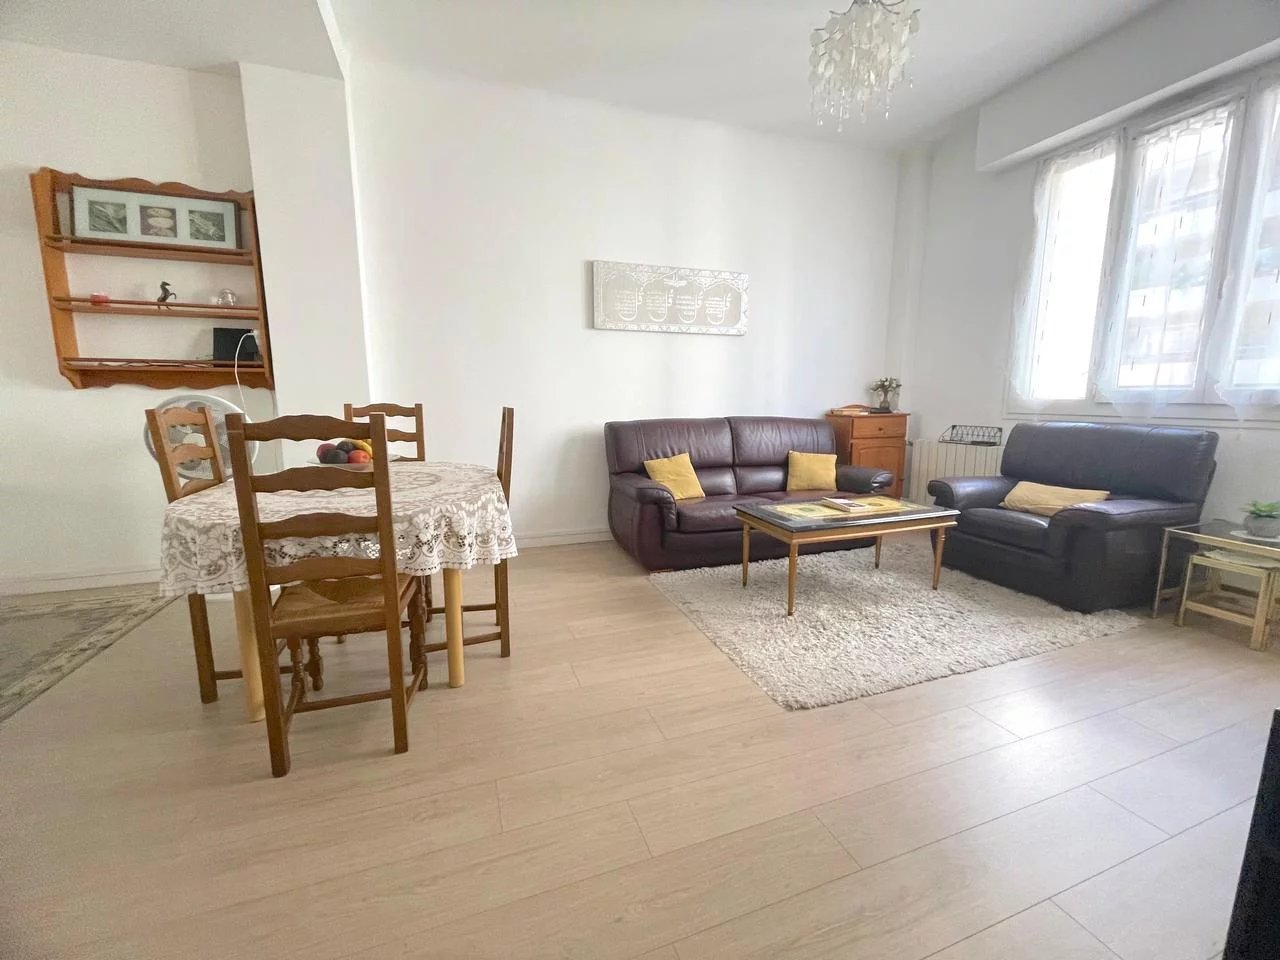 Appartement  2 Rooms 38m2  for sale   195 000 €